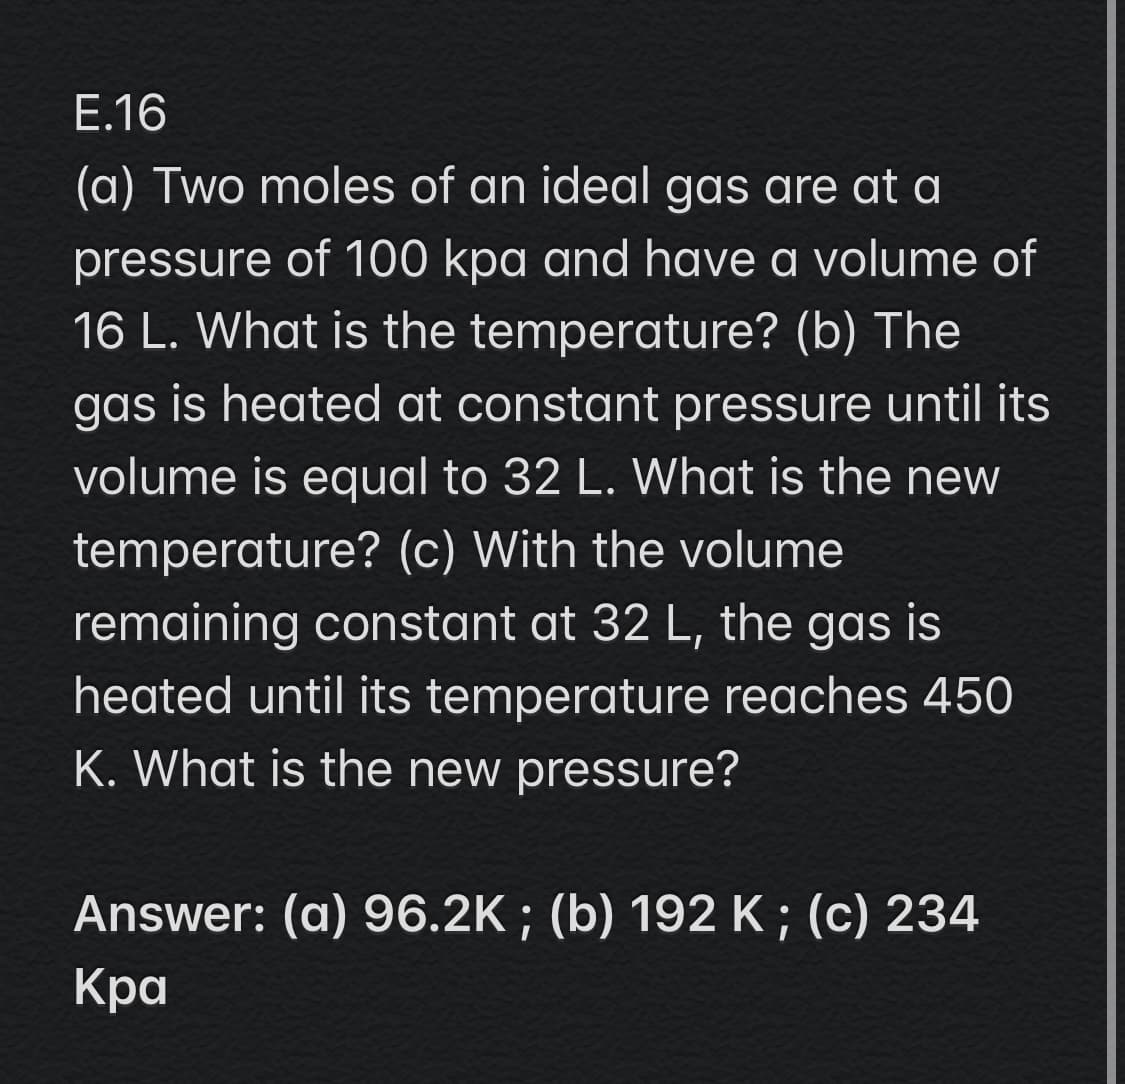 E.16
(a) Two moles of an ideal gas are at a
pressure of 100 kpa and have a volume of
16 L. What is the temperature? (b) The
gas is heated at constant pressure until its
volume is equal to 32 L. What is the new
temperature? (c) With the volume
remaining constant at 32 L, the gas is
heated until its temperature reaches 450
K. What is the new pressure?
Answer: (a) 96.2K ; (b) 192 K; (c) 234
Кра
